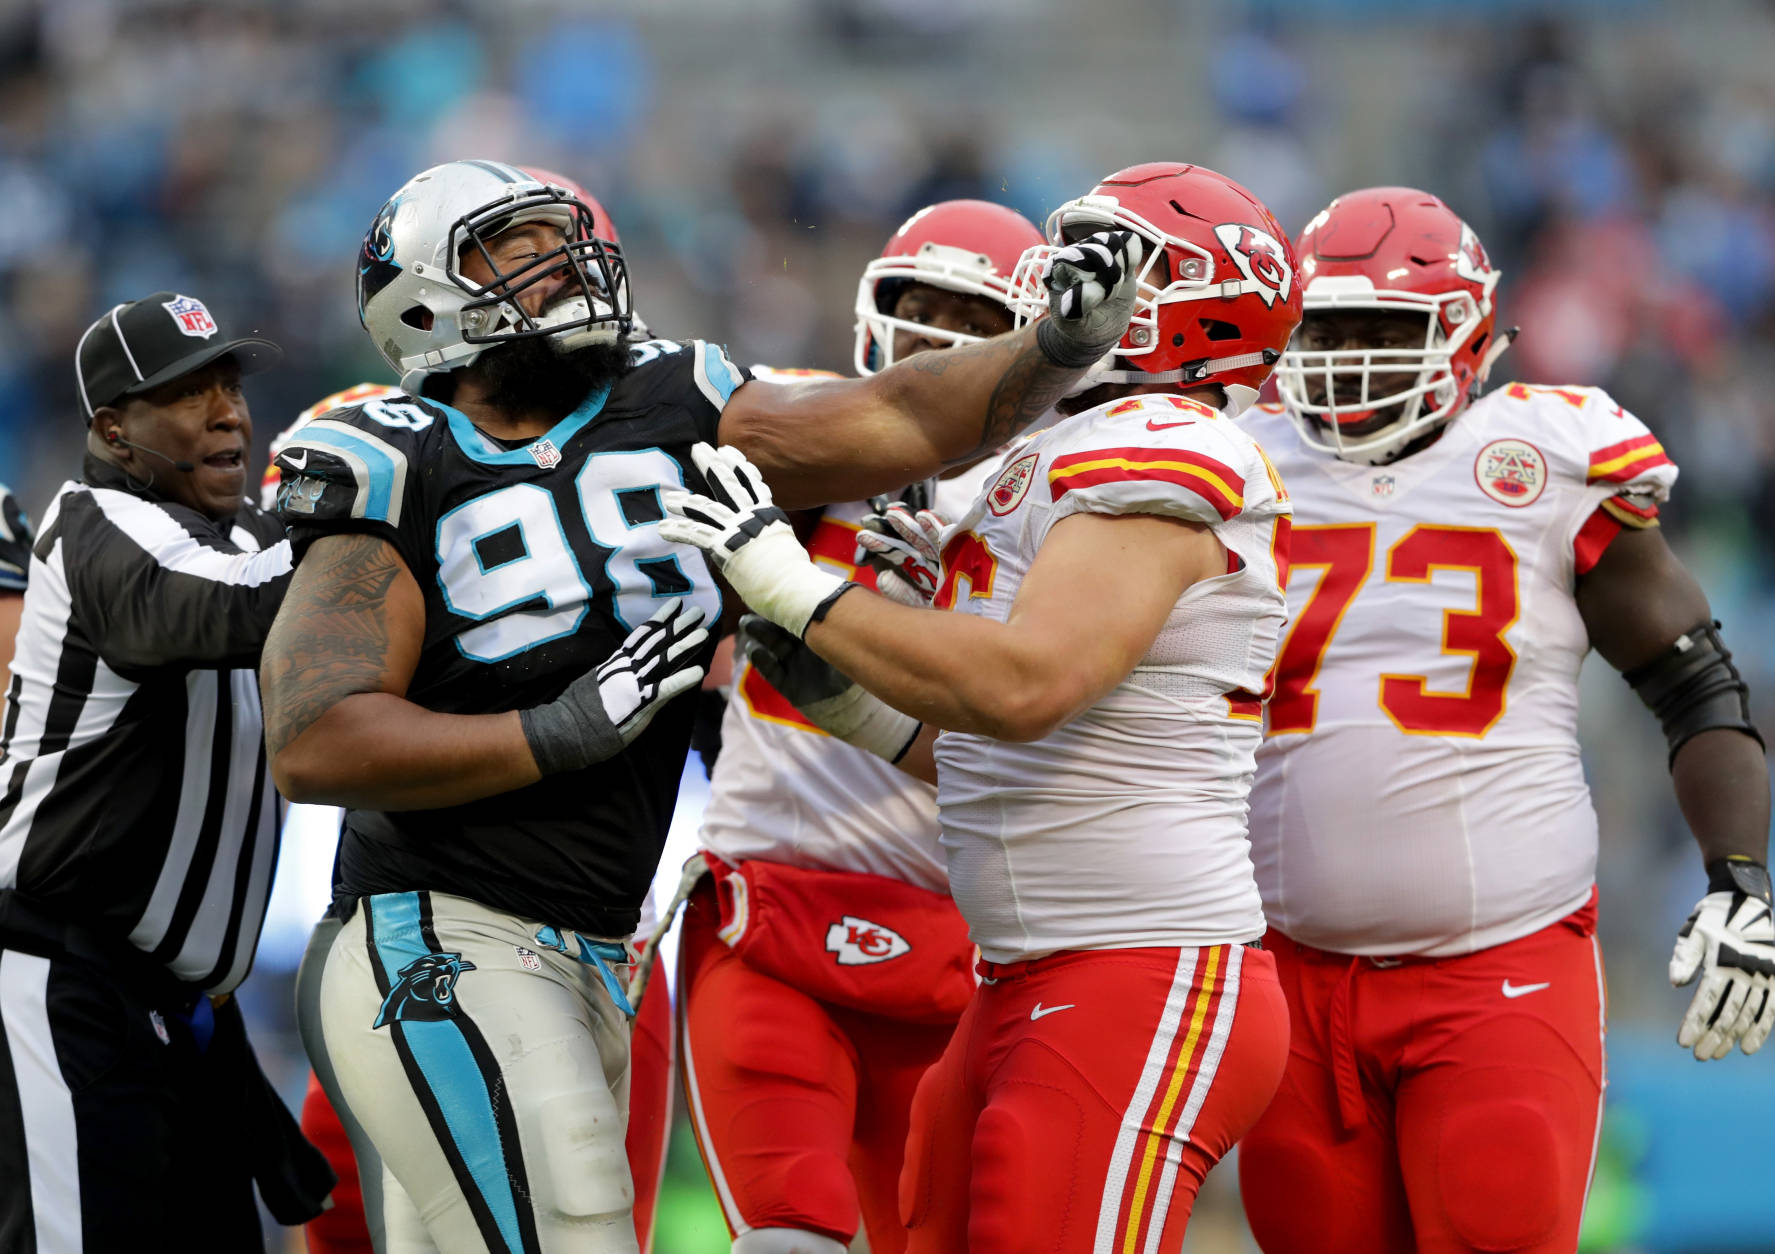 CHARLOTTE, NC - NOVEMBER 13:   Star Lotulelei #98 of the Carolina Panthers shoves  Laurent Duvernay-Tardif #76 of the Kansas City Chiefs after a play in the 4th quarter during their game at Bank of America Stadium on November 13, 2016 in Charlotte, North Carolina.  (Photo by Streeter Lecka/Getty Images)